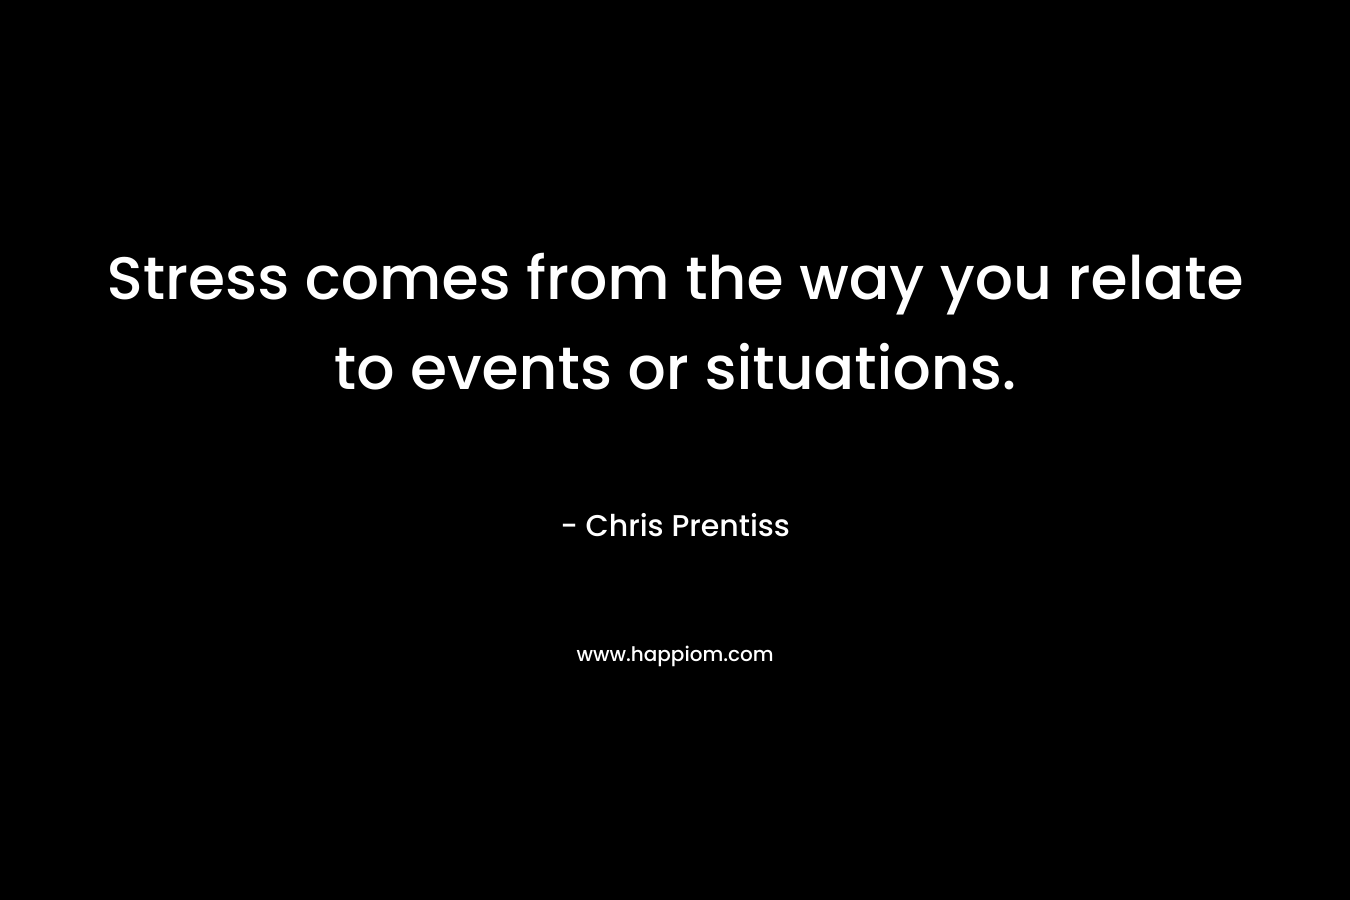 Stress comes from the way you relate to events or situations. – Chris Prentiss